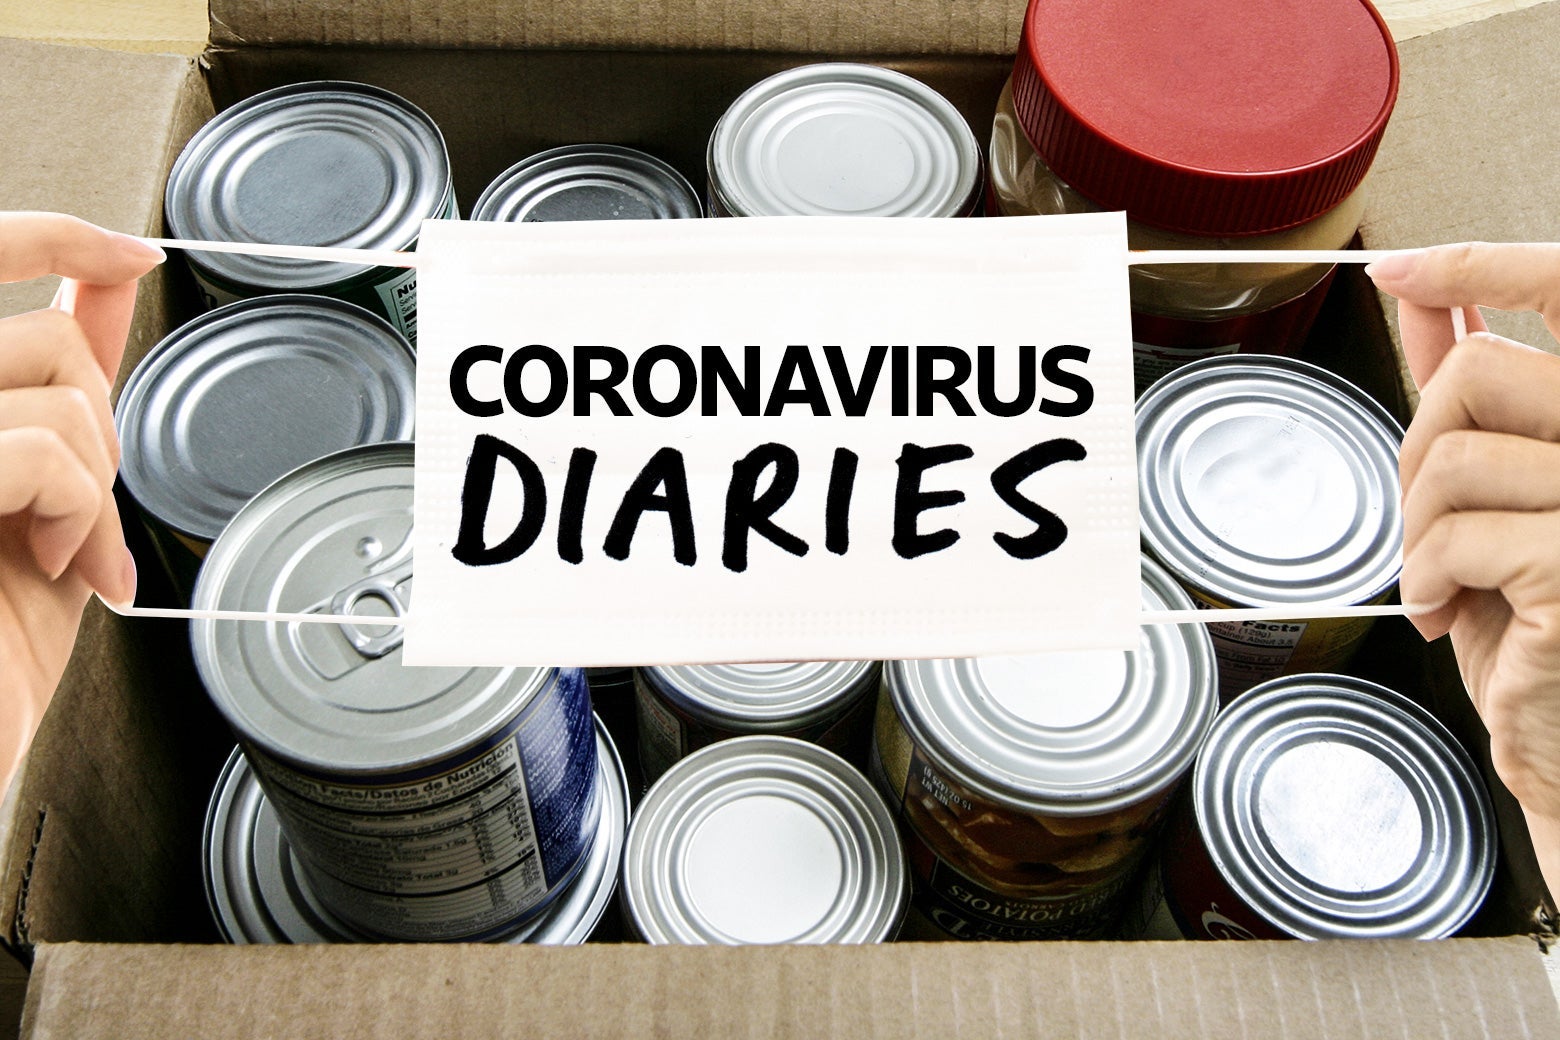 A mask labeled "coronavirus diaries" is held up over a cardboard box filled with cans.